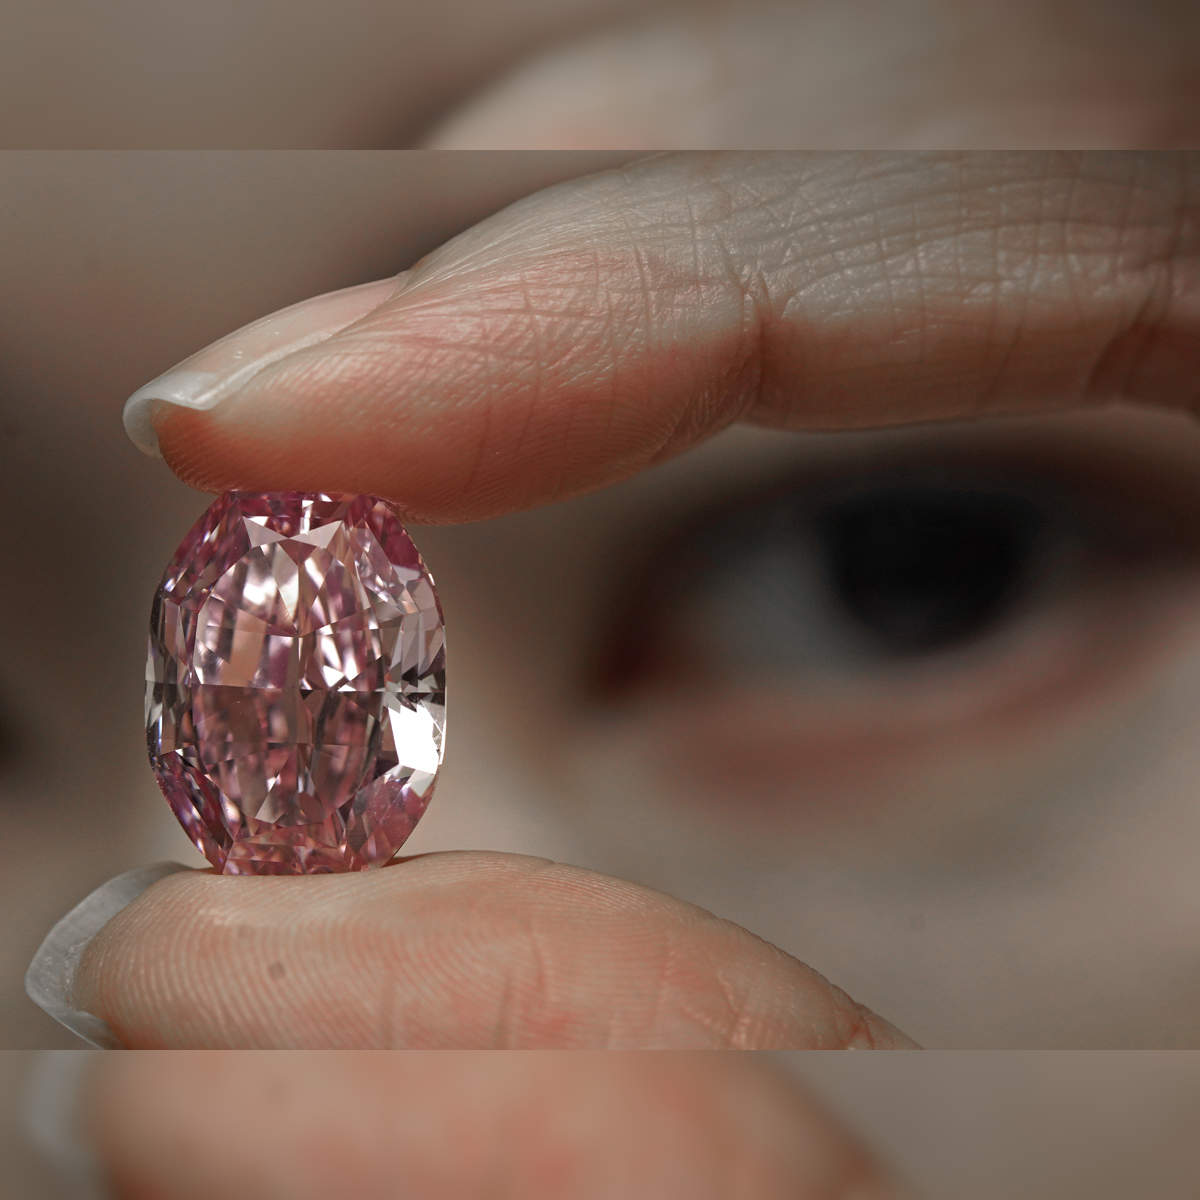 Ultra-rare' pink diamond sells for $34.8 million at auction